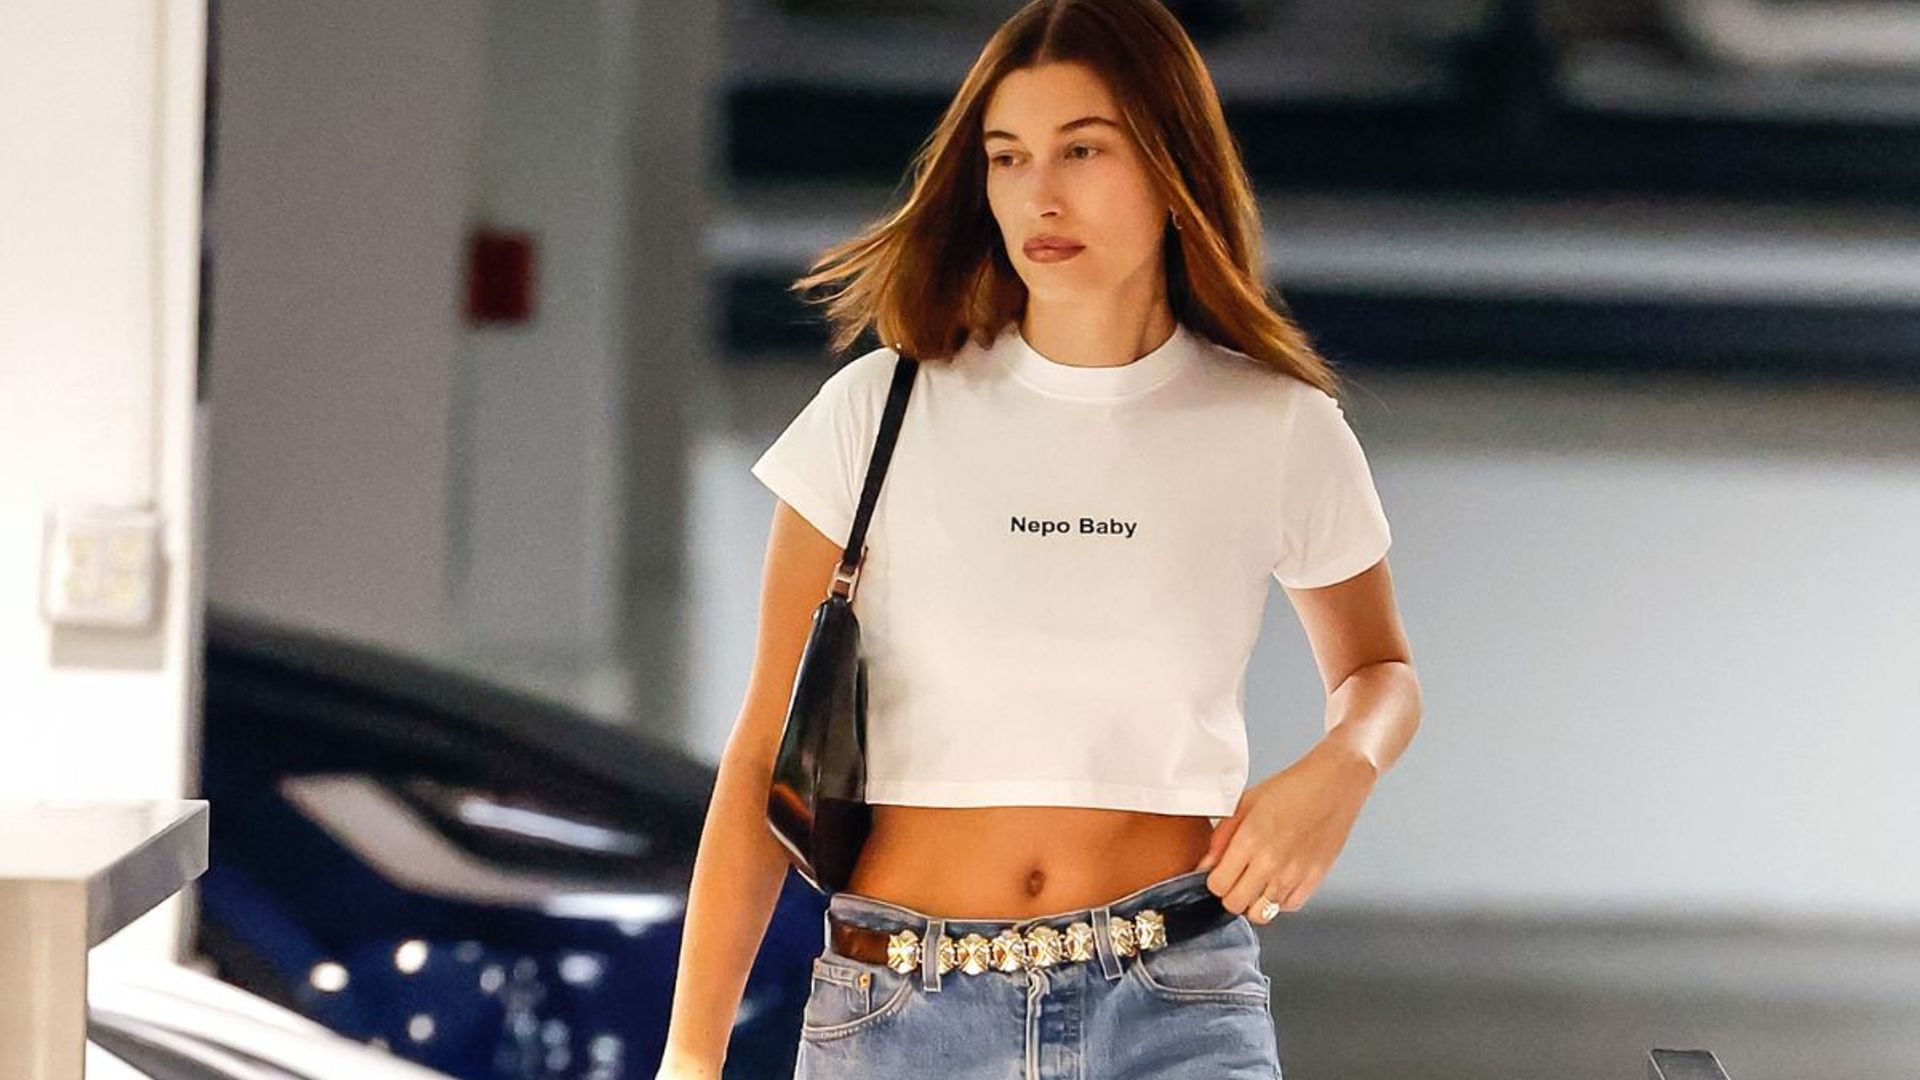 Hailey Bieber hits back at critics in 'Nepo Baby' T-shirt